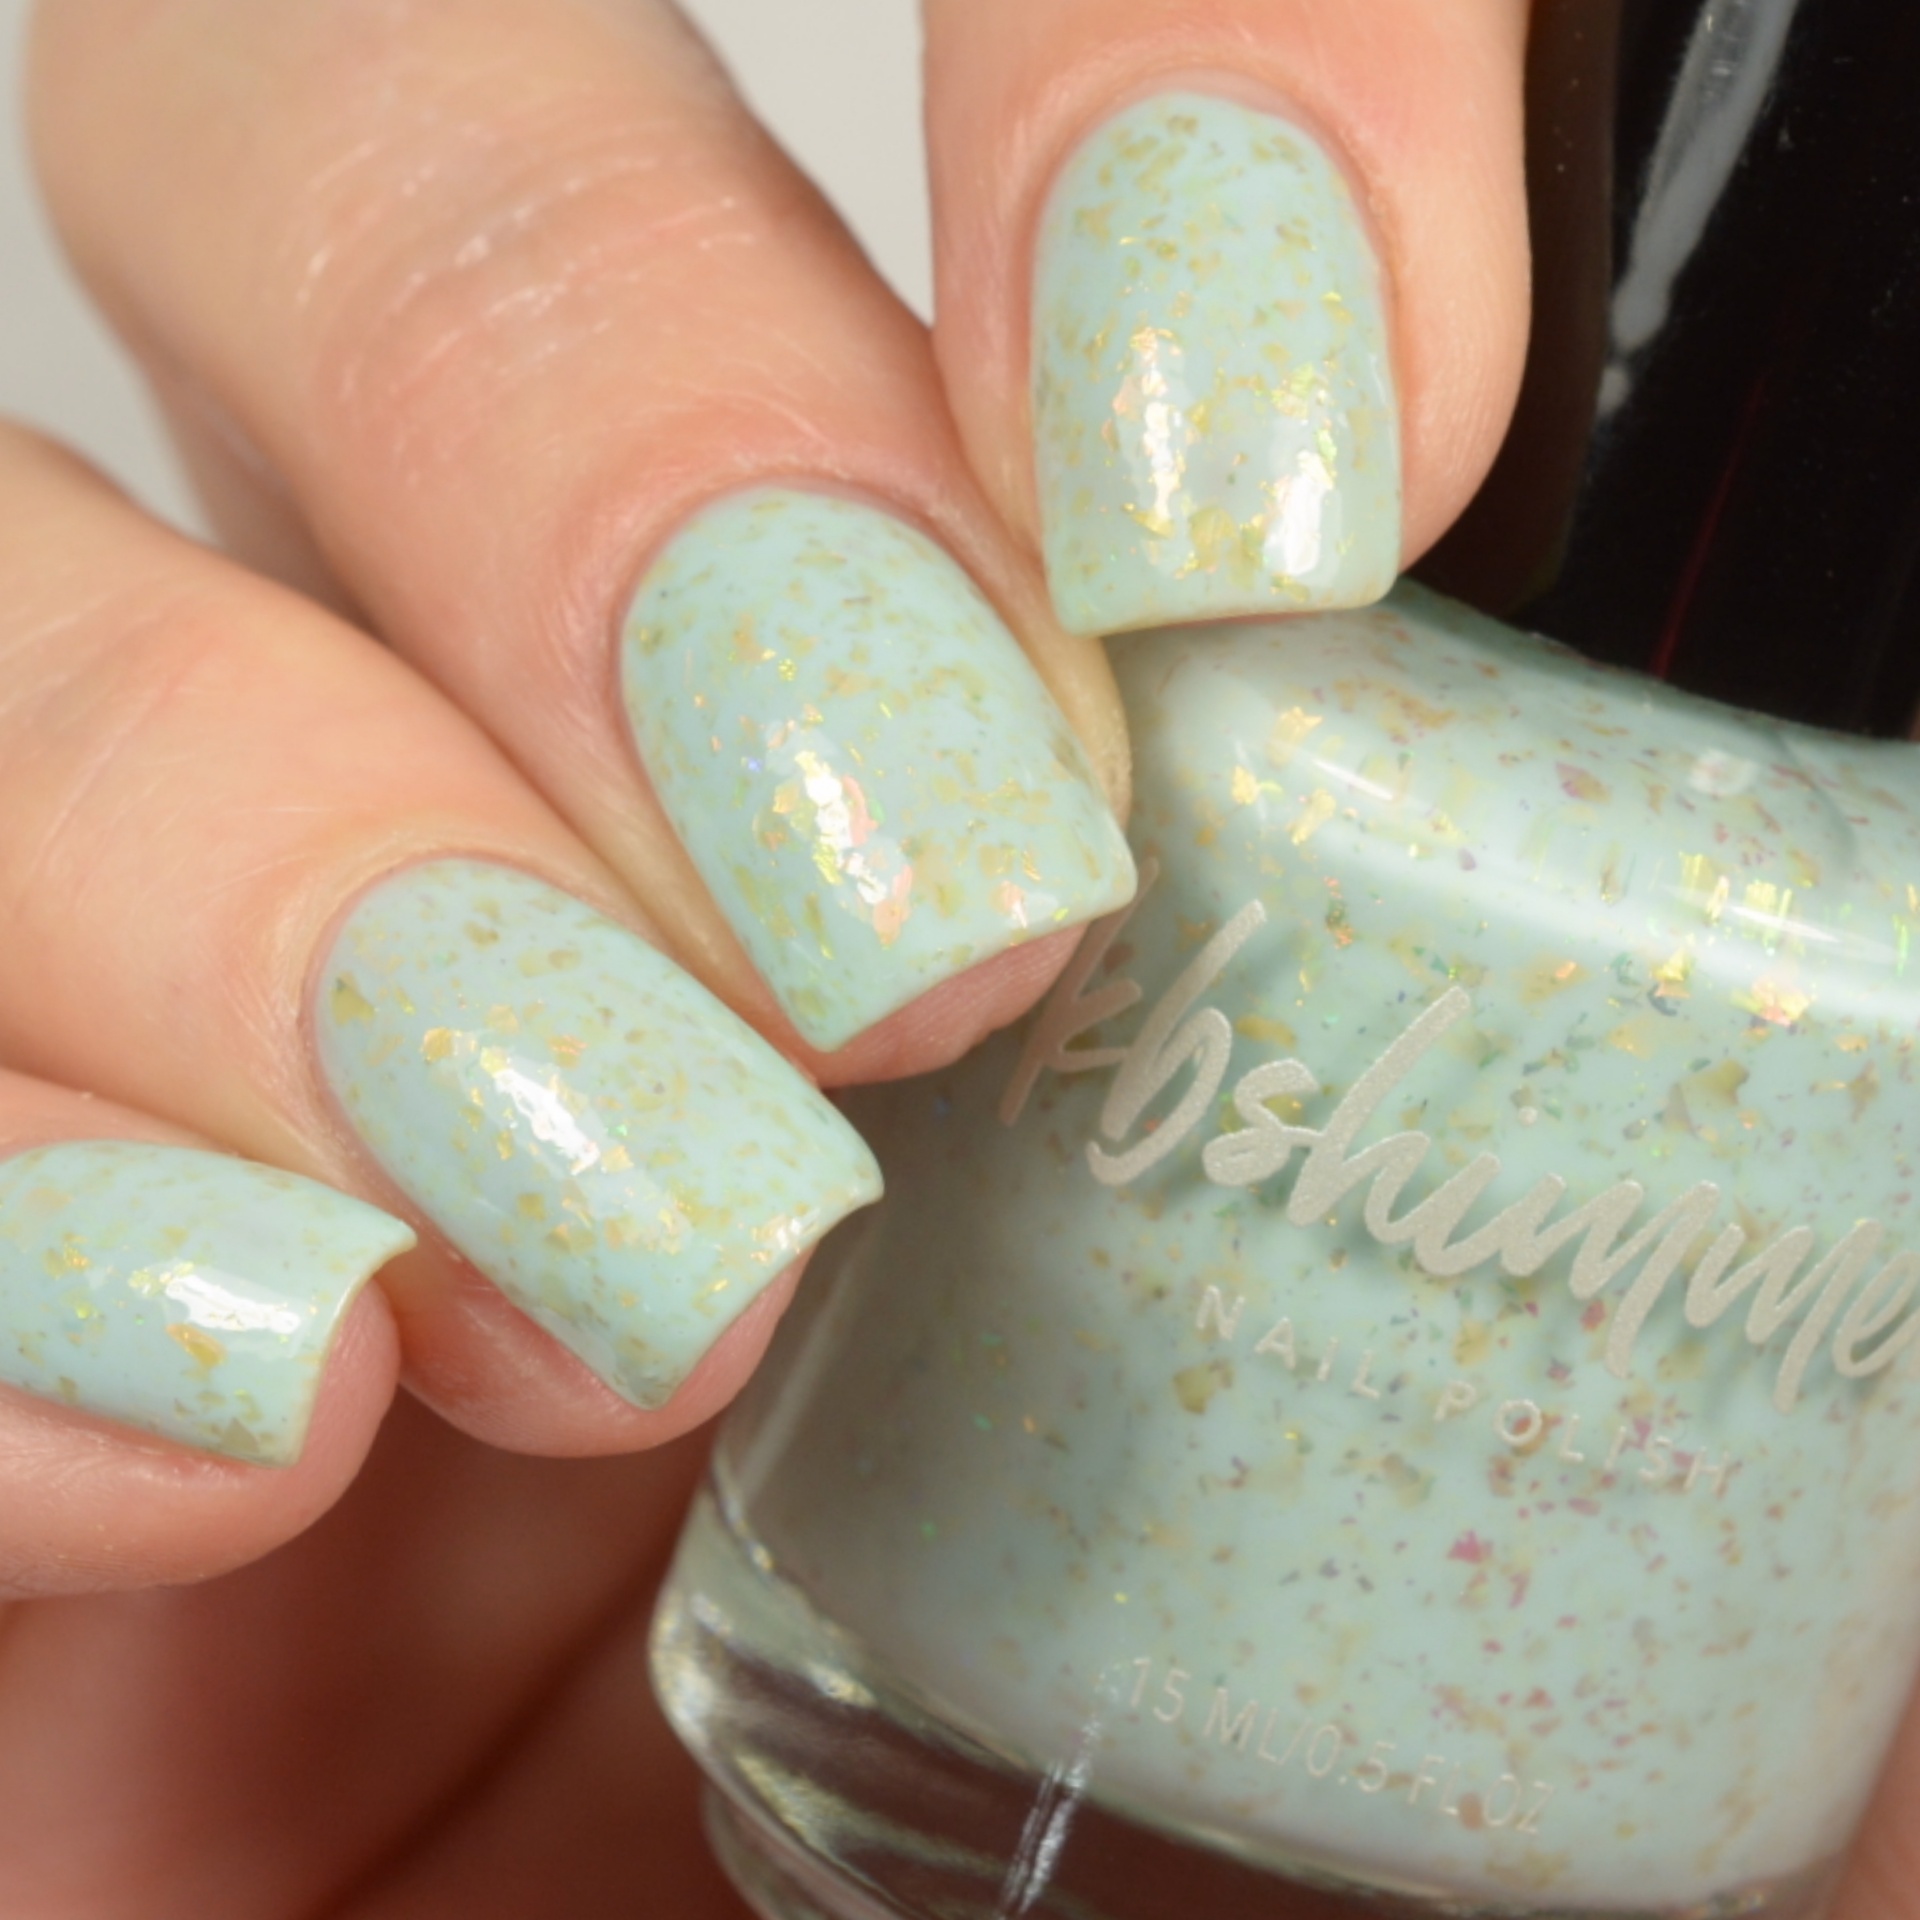 KBShimmer Water Relief Crelly Flakie Nail Polish